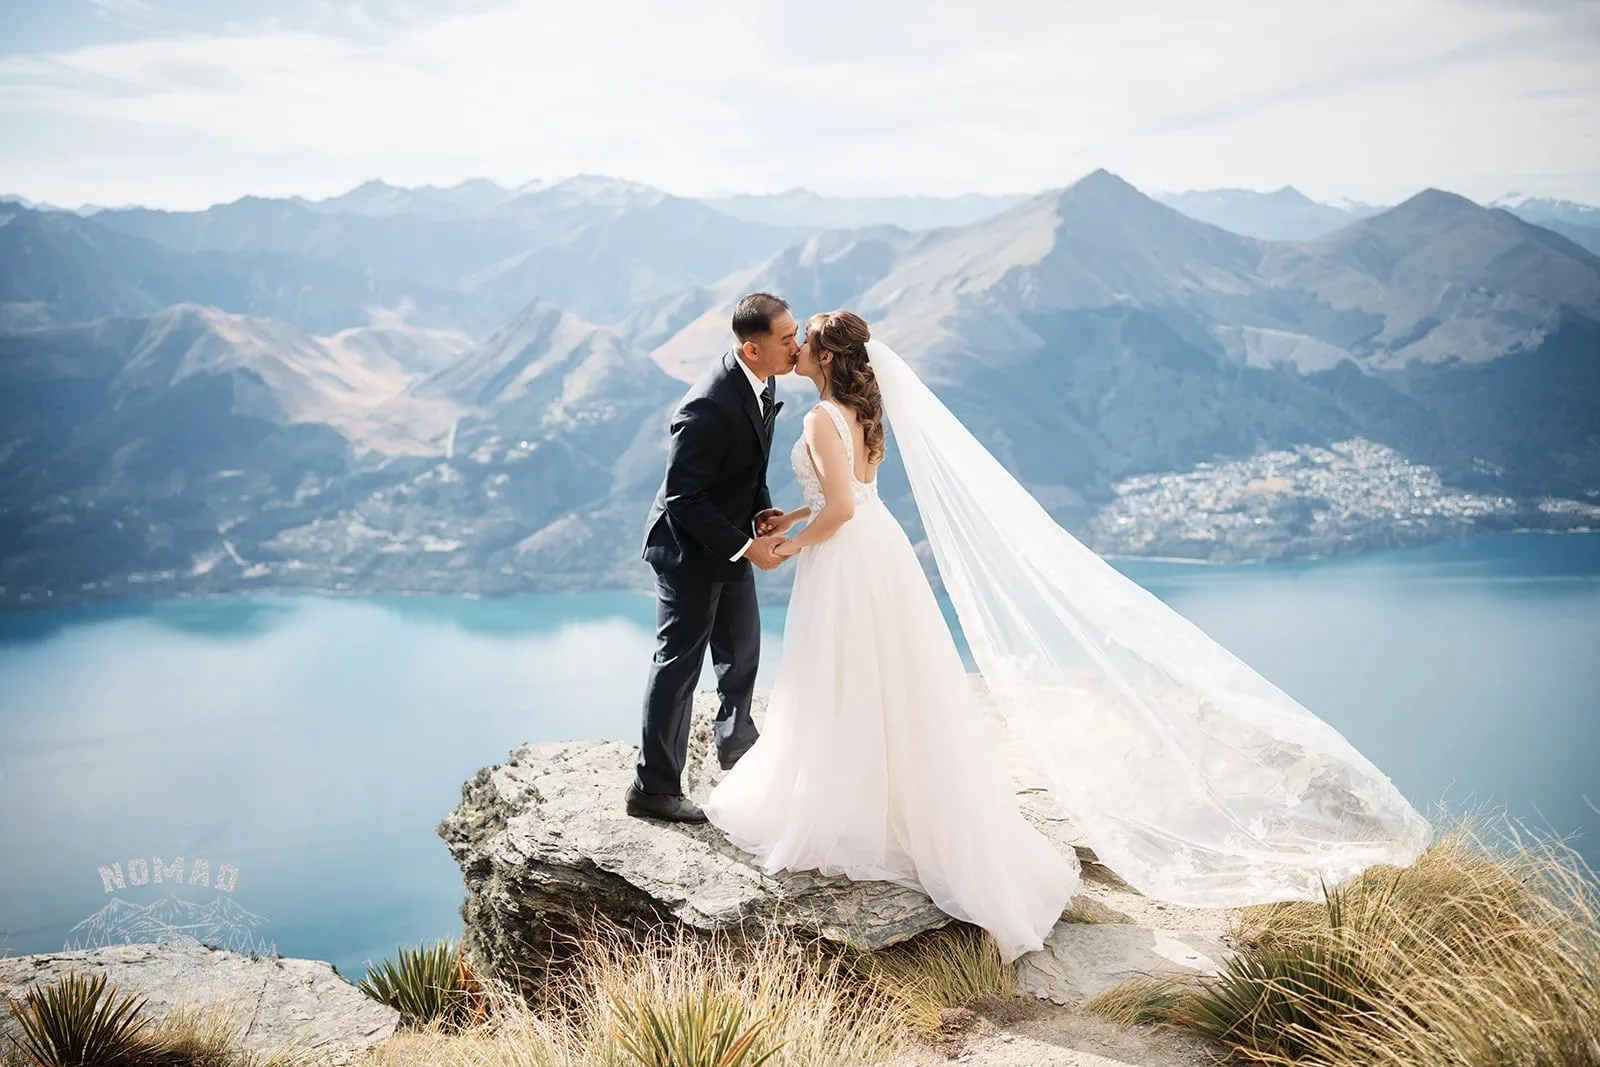 A couple, Nhi & Nicholas, pose on Cecil Peak for their pre-wedding shoot overlooking Lake Wanaka in Queenstown, NZ.